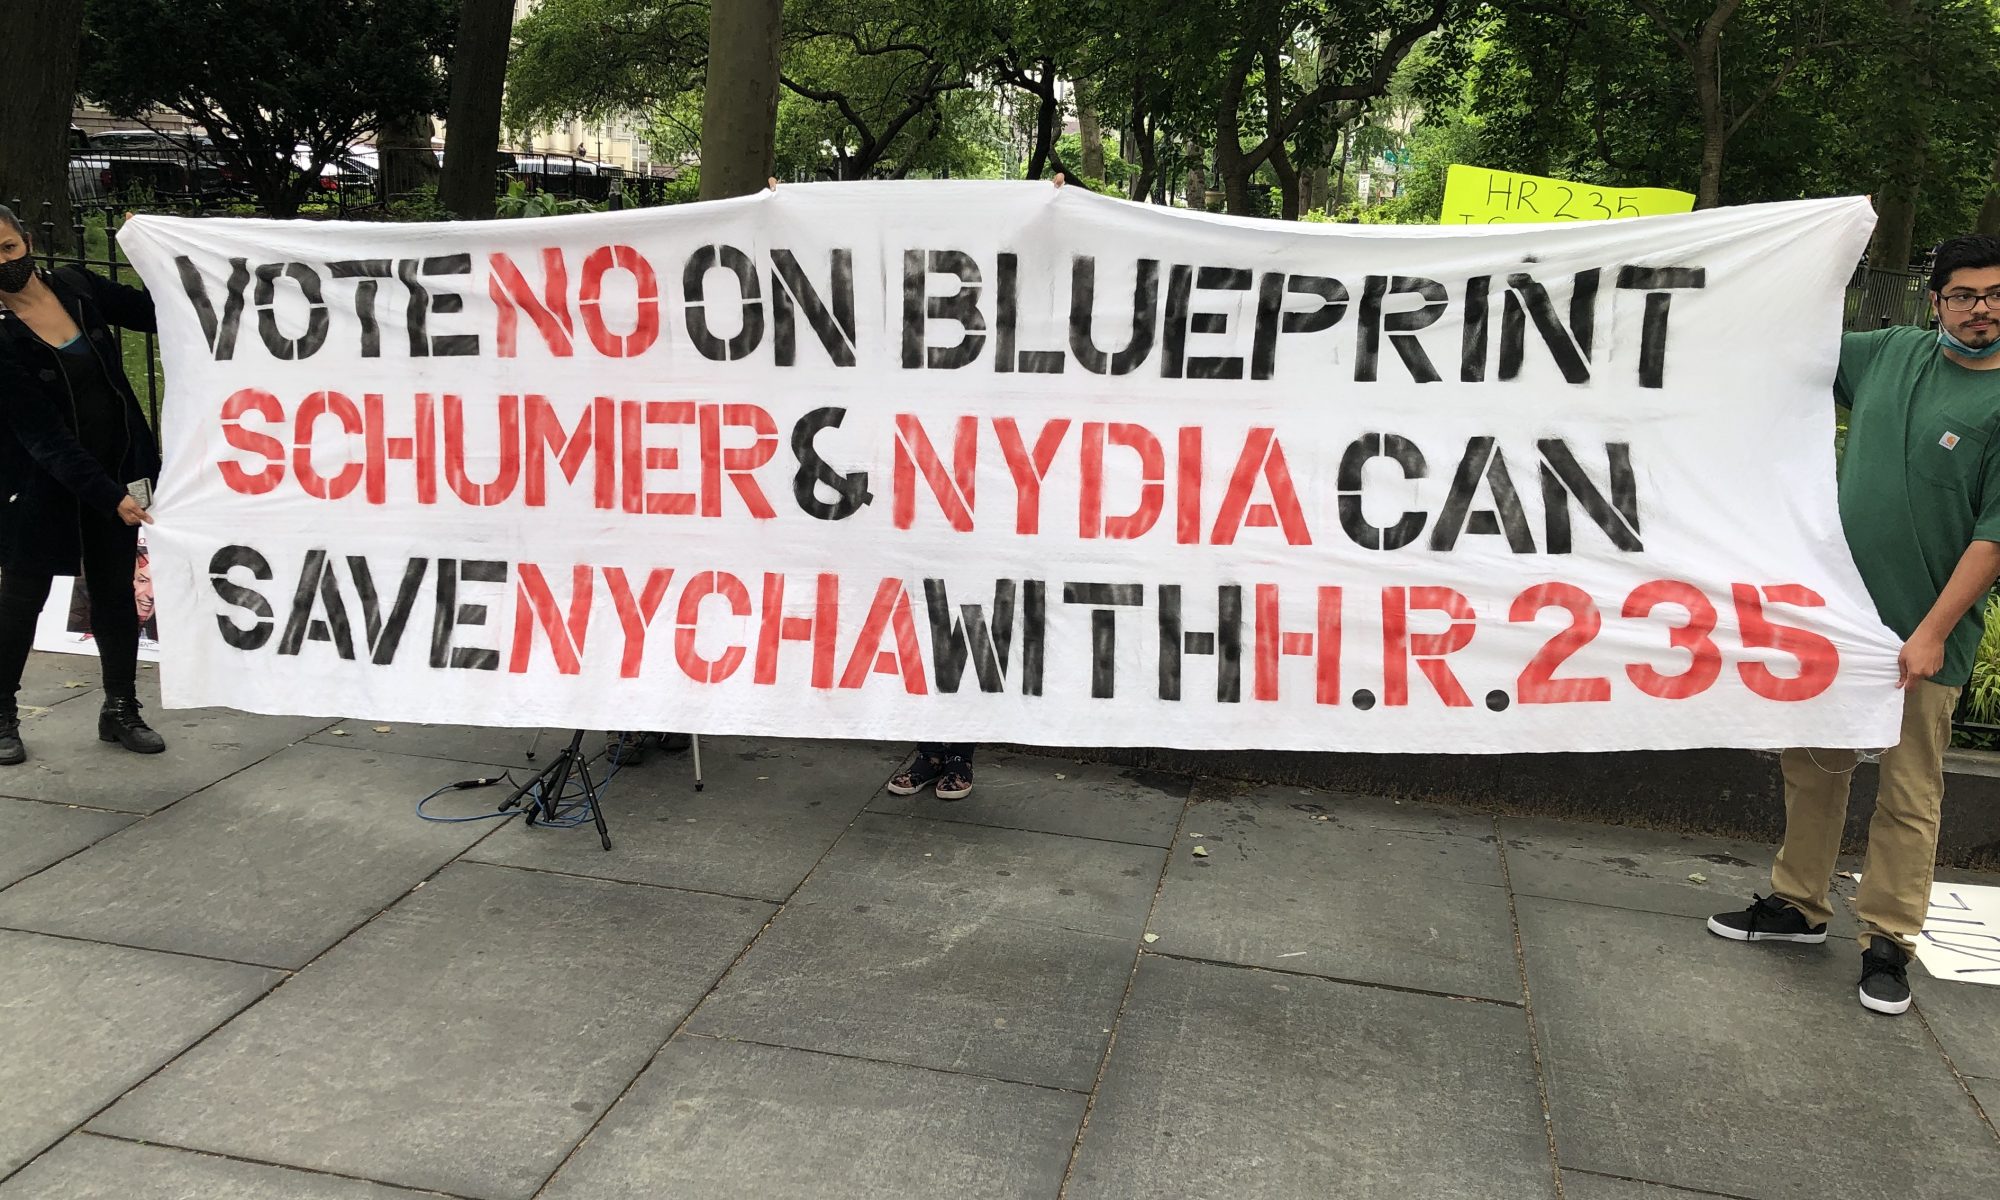 https://fightfornycha.org/wp-content/uploads/2021/06/NYCHA-Is-Not-For-Sale-Blueprint-2000x1200.jpg